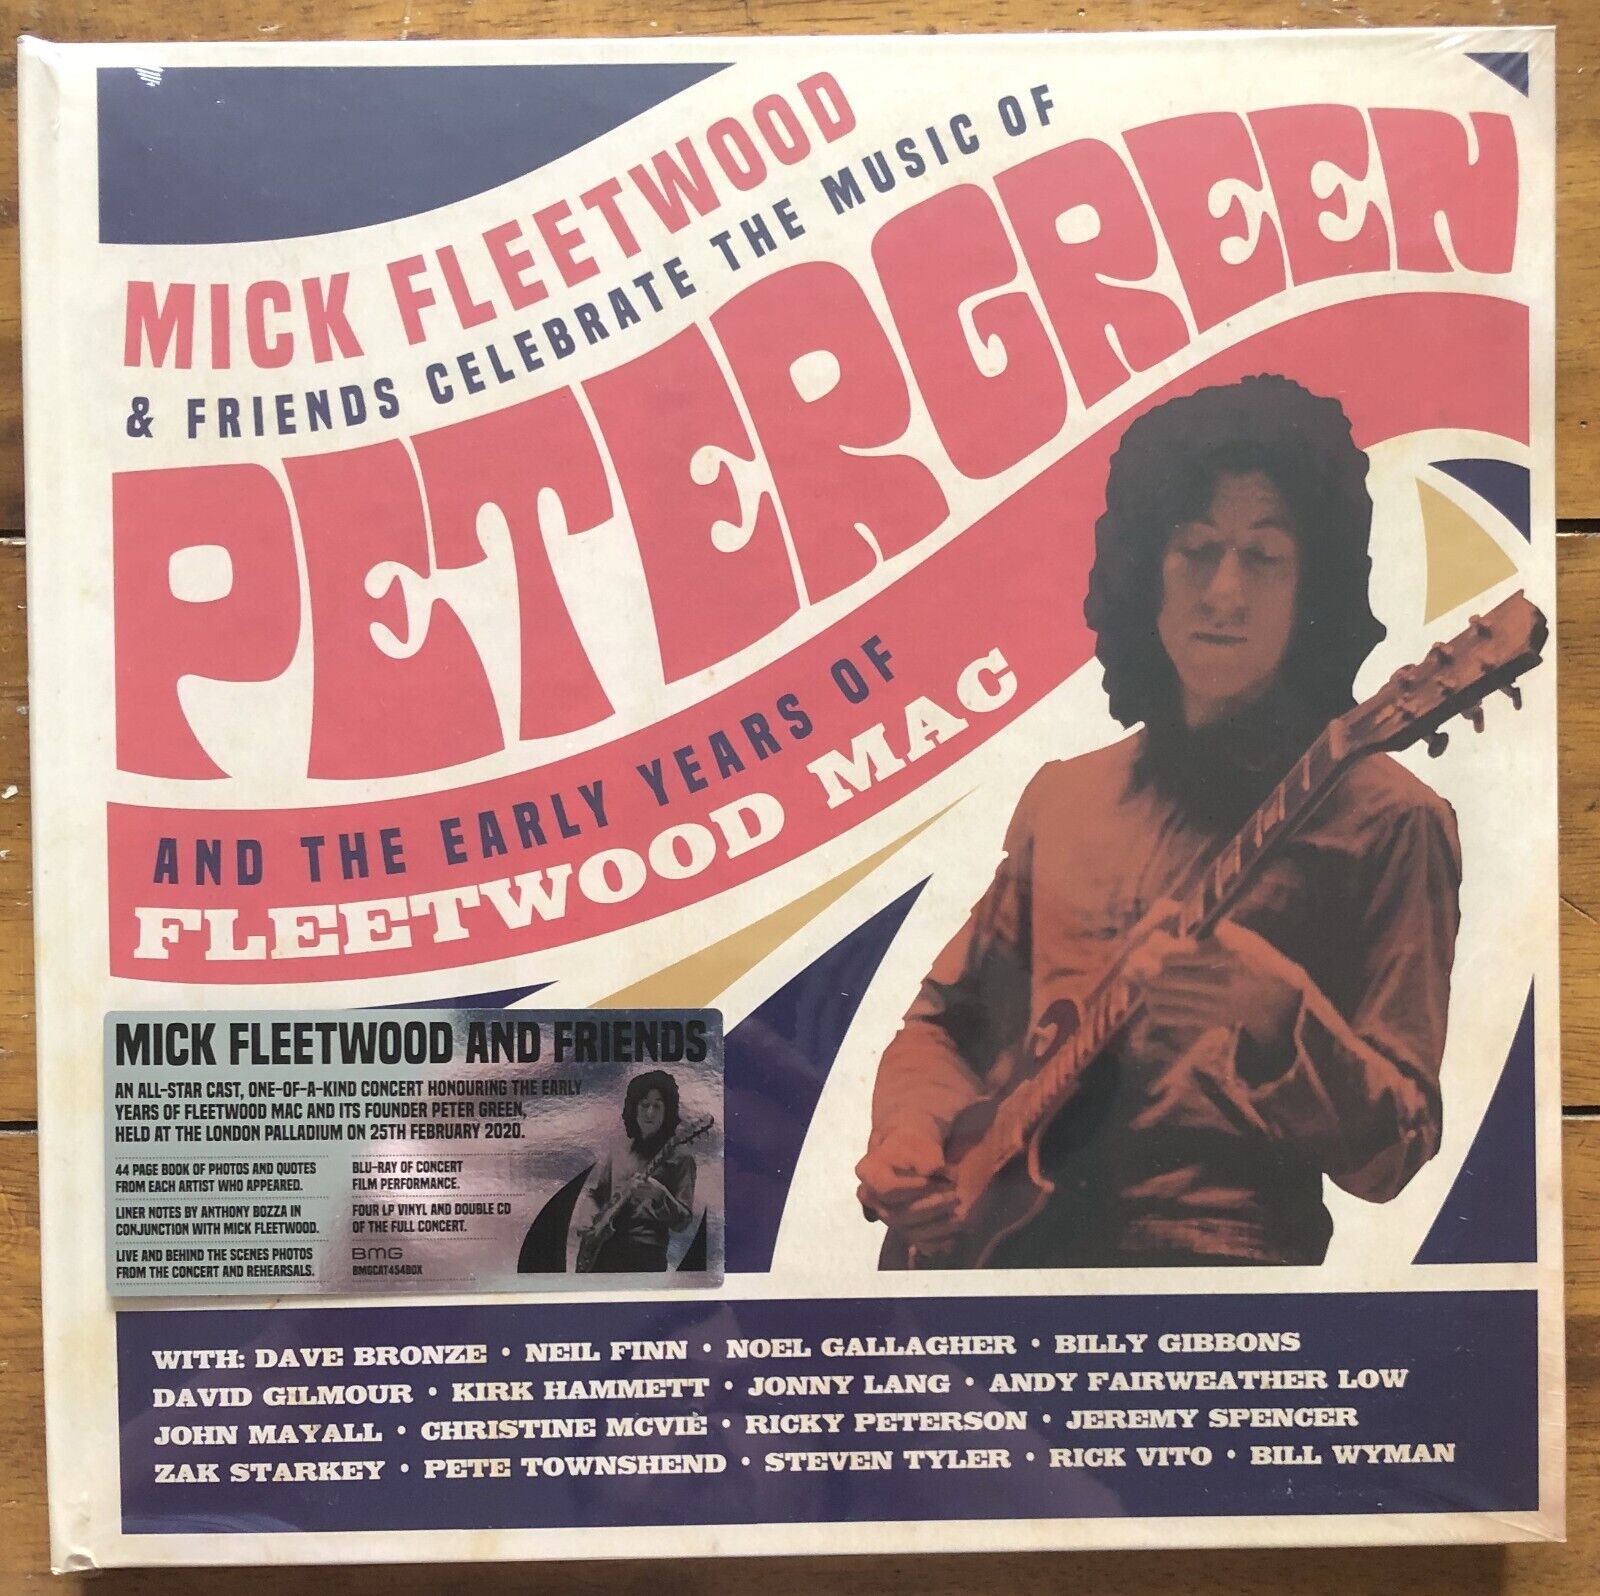 Mick Fleetwood and Friends Celebrate the Music of Peter G Box New 4050538605297